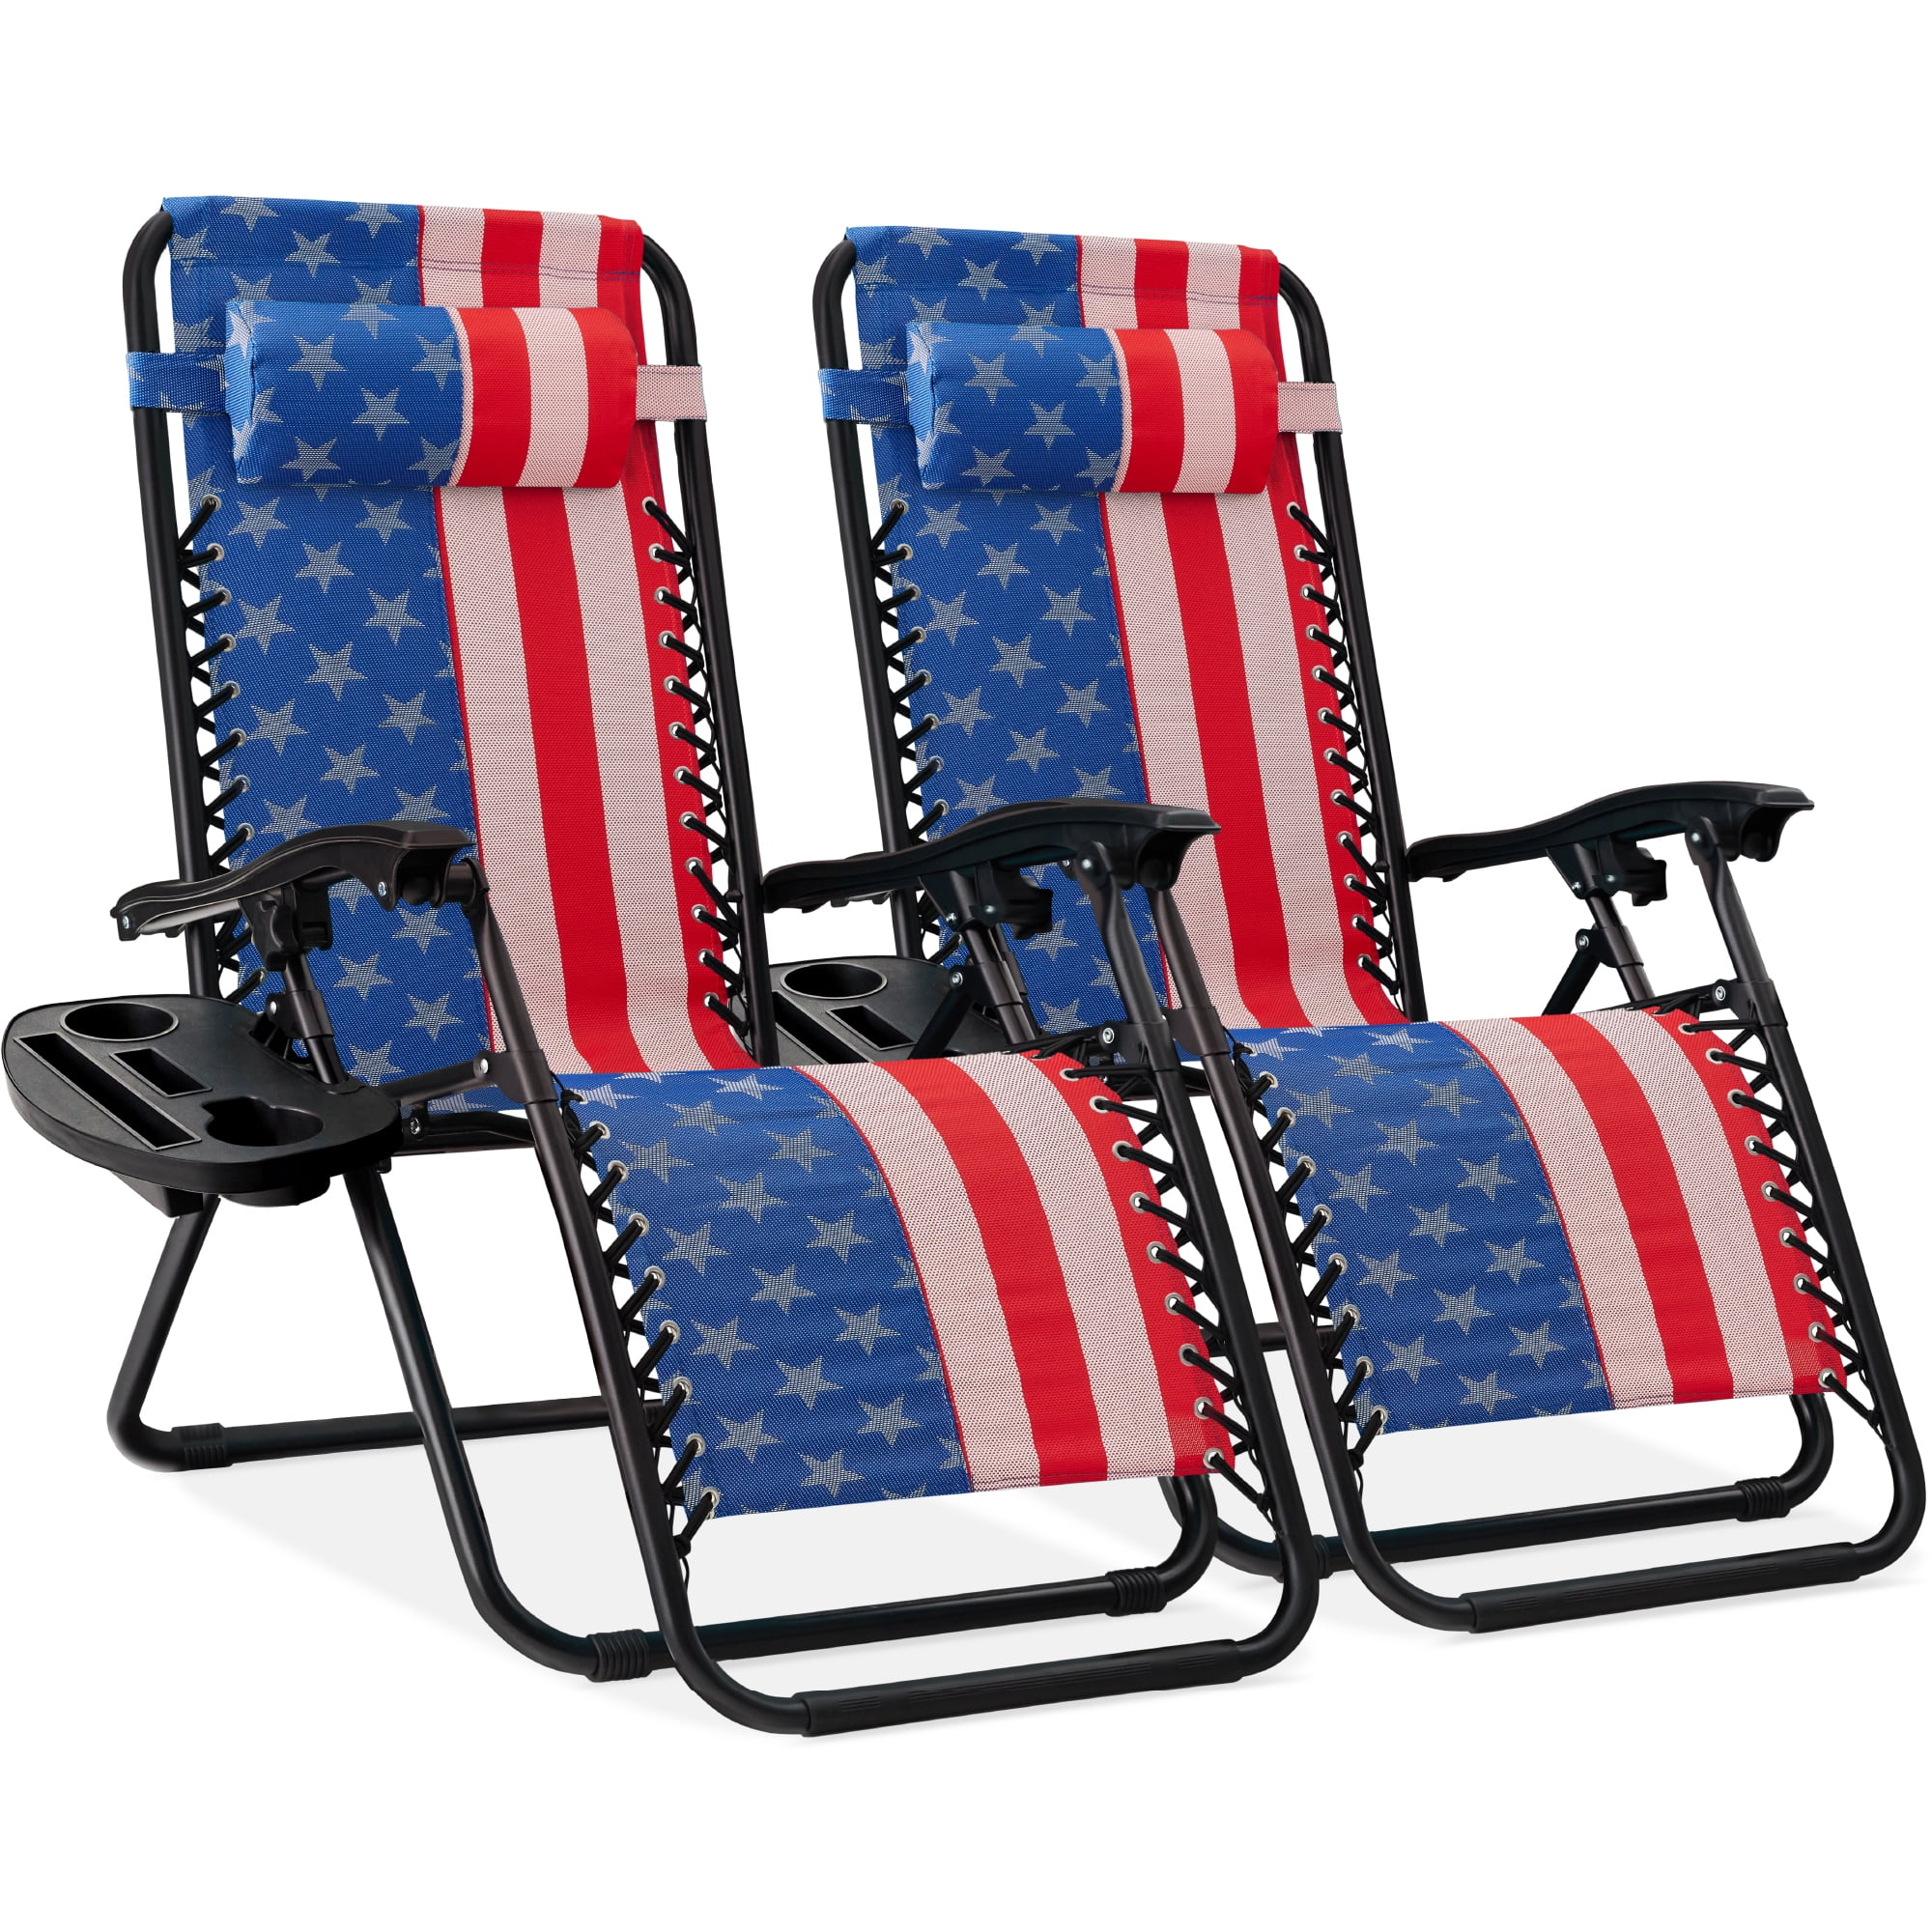 Best Choice Products Set of 2 Zero Gravity Lounge Chair Recliners for Patio, Pool w/ Cup Holder Tray - American Flag